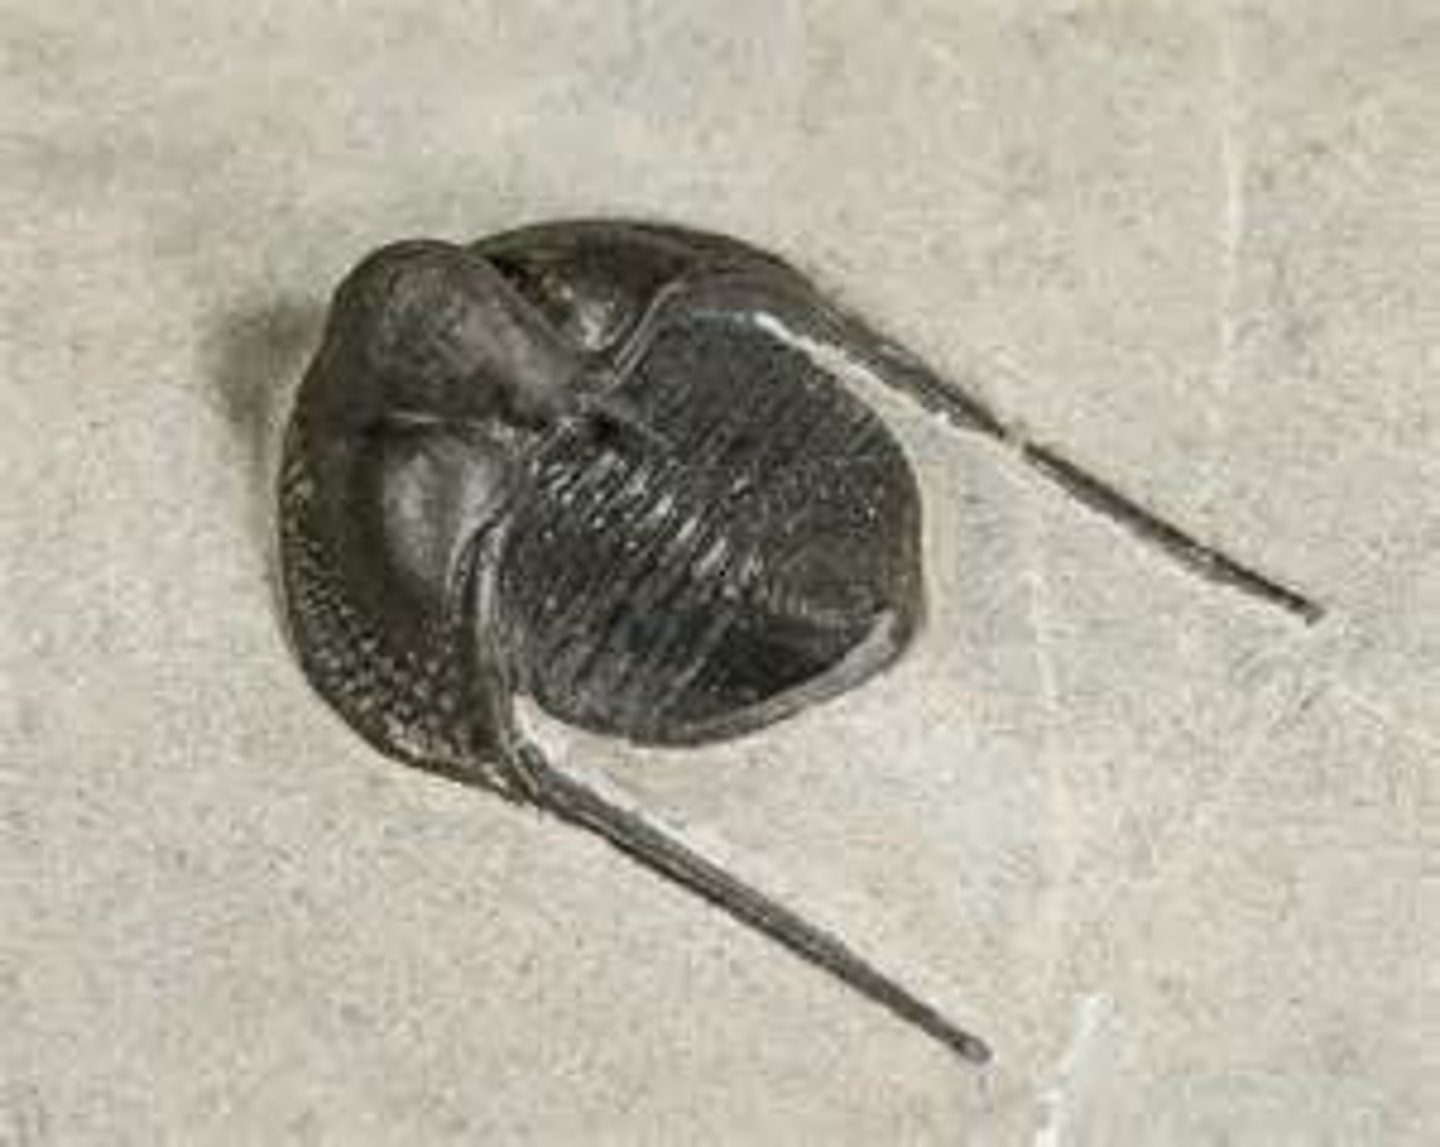 <p>Polymerid trilobite genus</p><p>a genus of extinct trinucleid trilobites that lived during the Ordovician period. They were mostly blind. They are found in the United States, Canada, Venezuela, the United Kingdom, France, the Czech Republic, Morocco and Turkey</p>